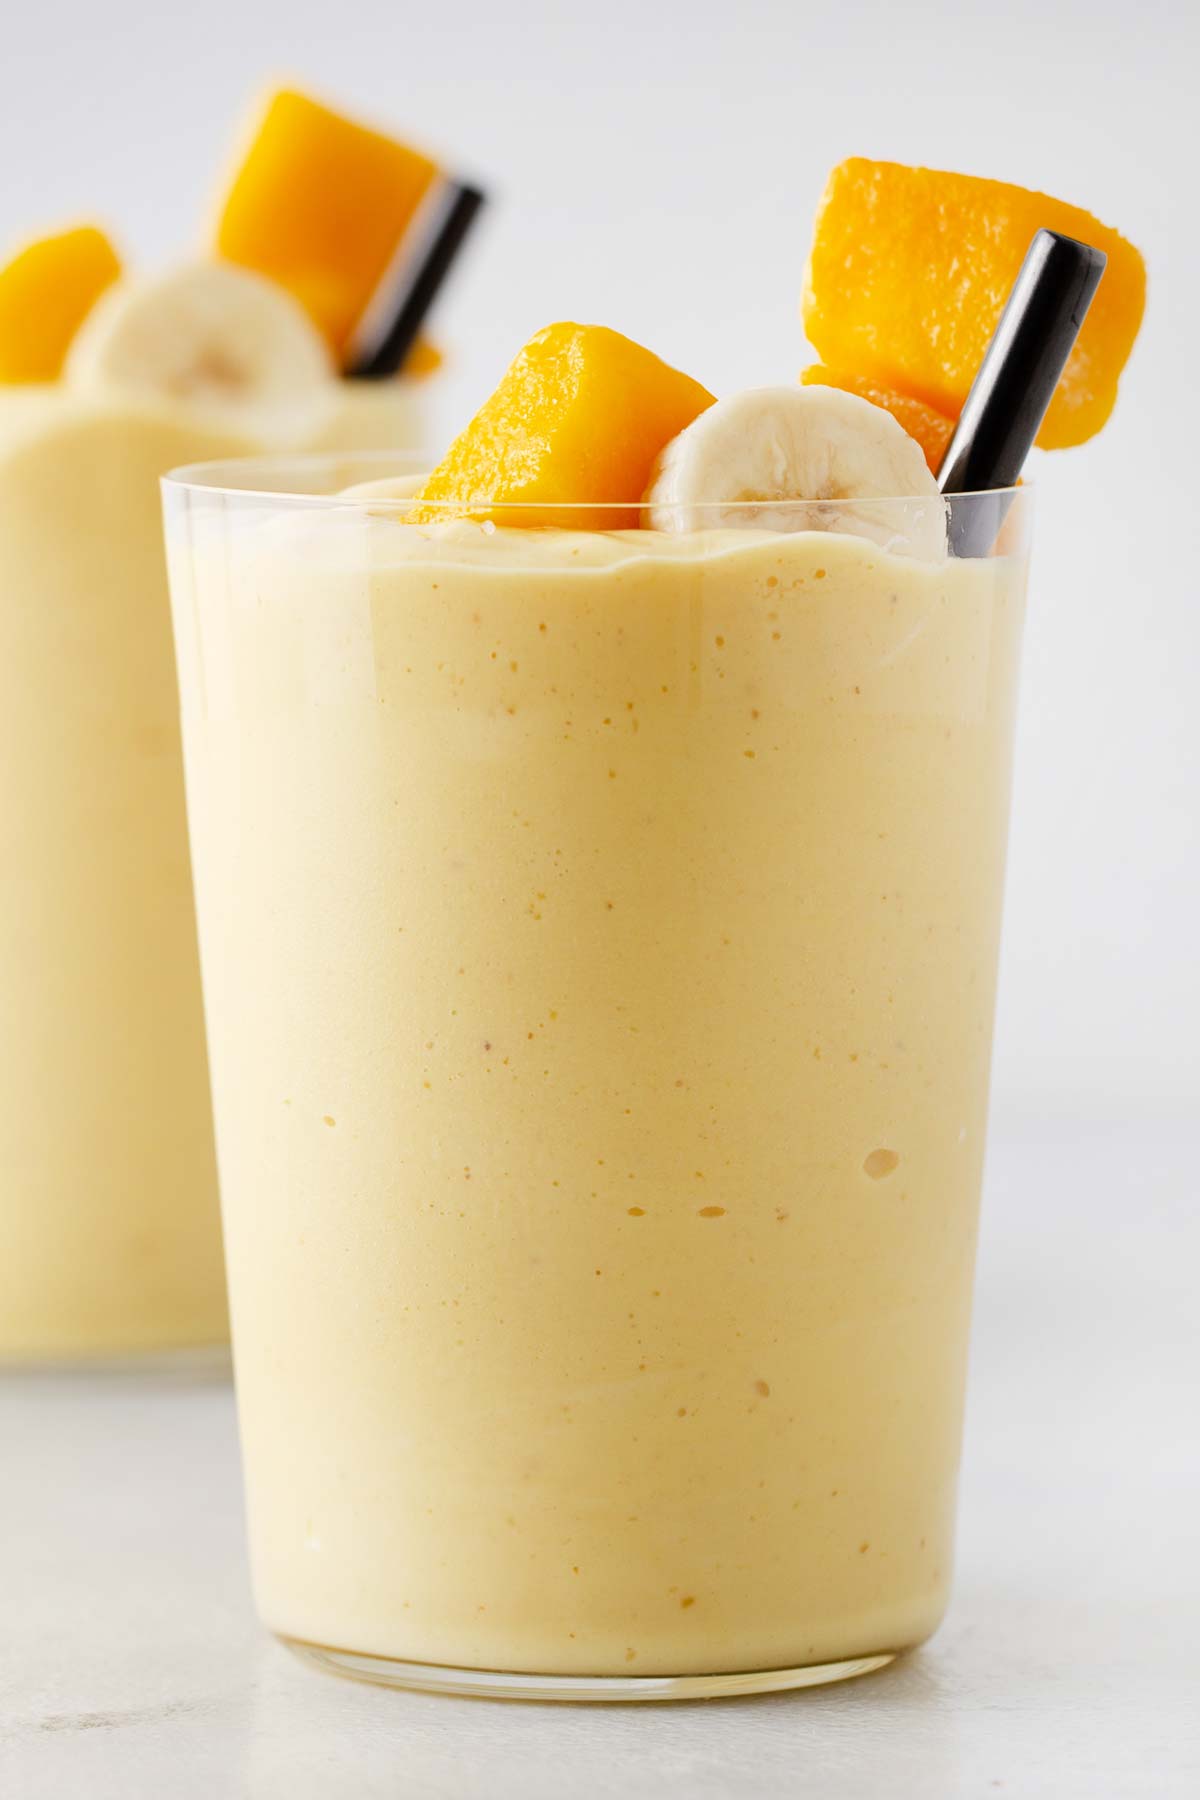 Mango yogurt smoothie in a glass cup with a metal straw.